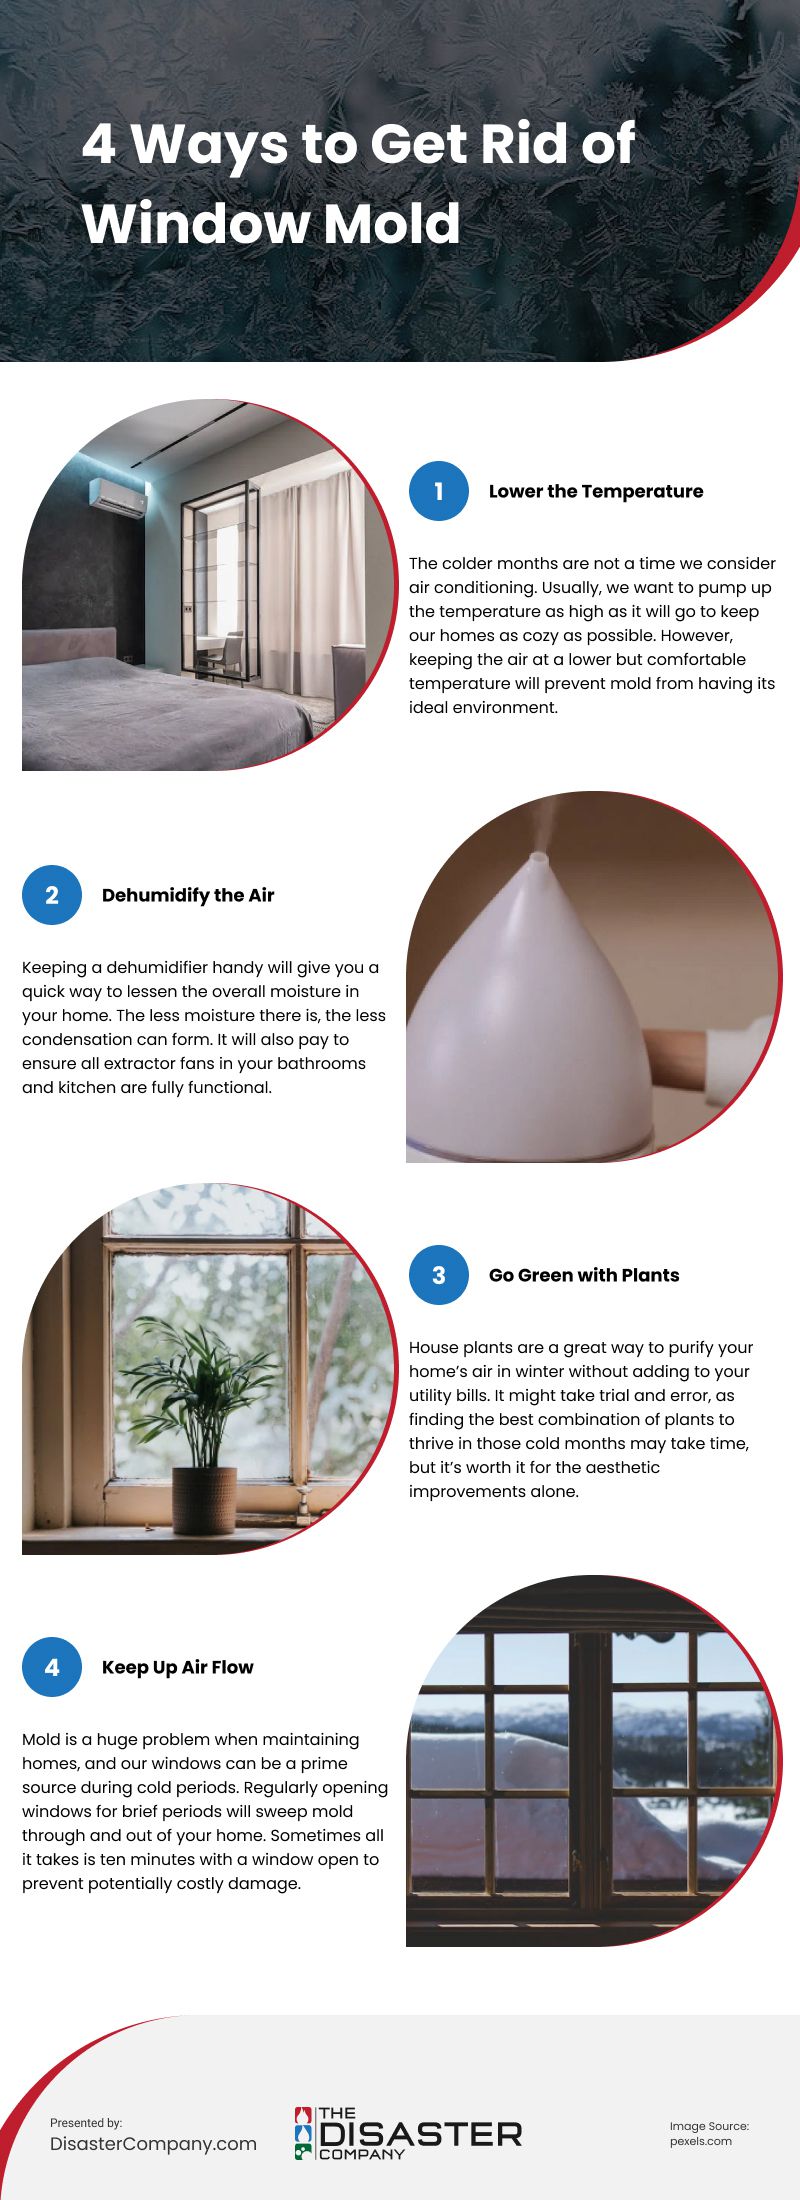 4 Ways to Get Rid of Window Mold Infographic